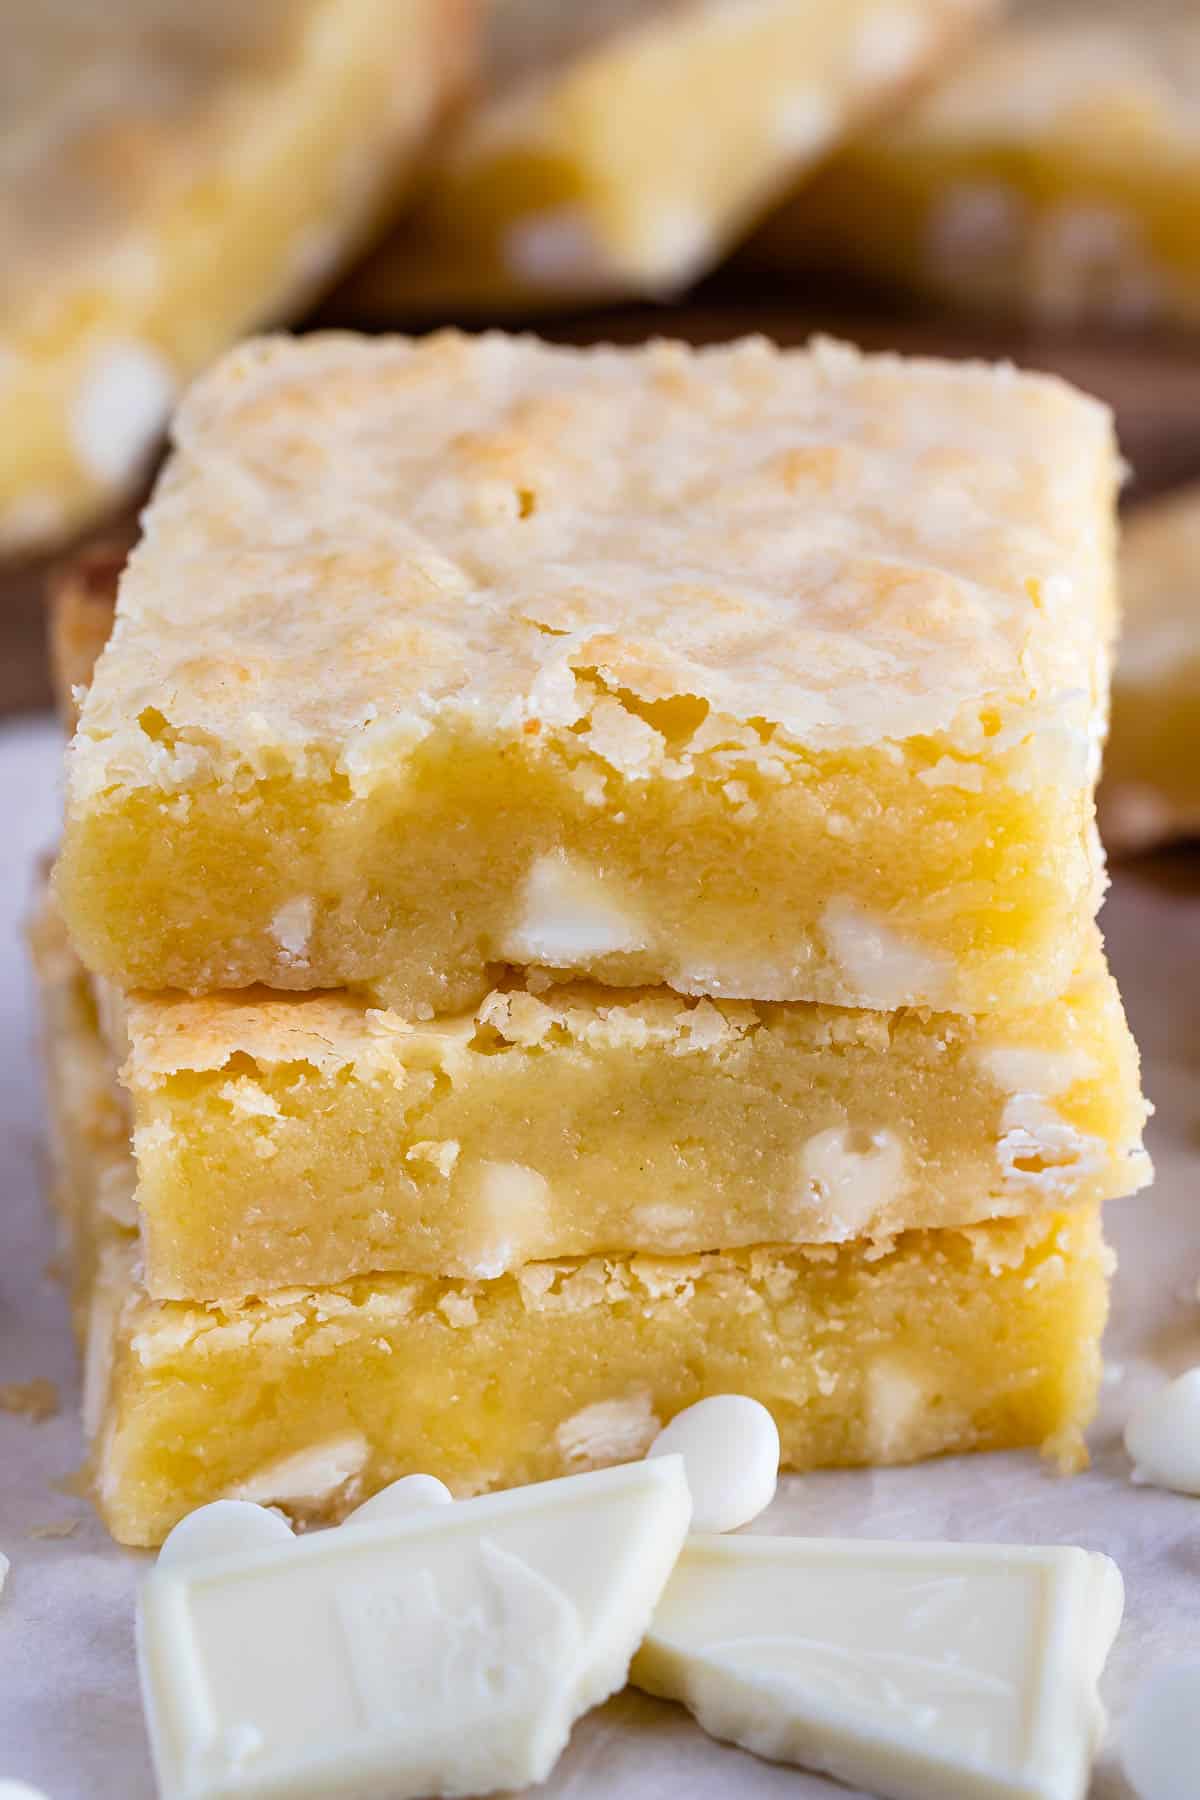 stacked yellow brownies with white chocolate chips baked in.